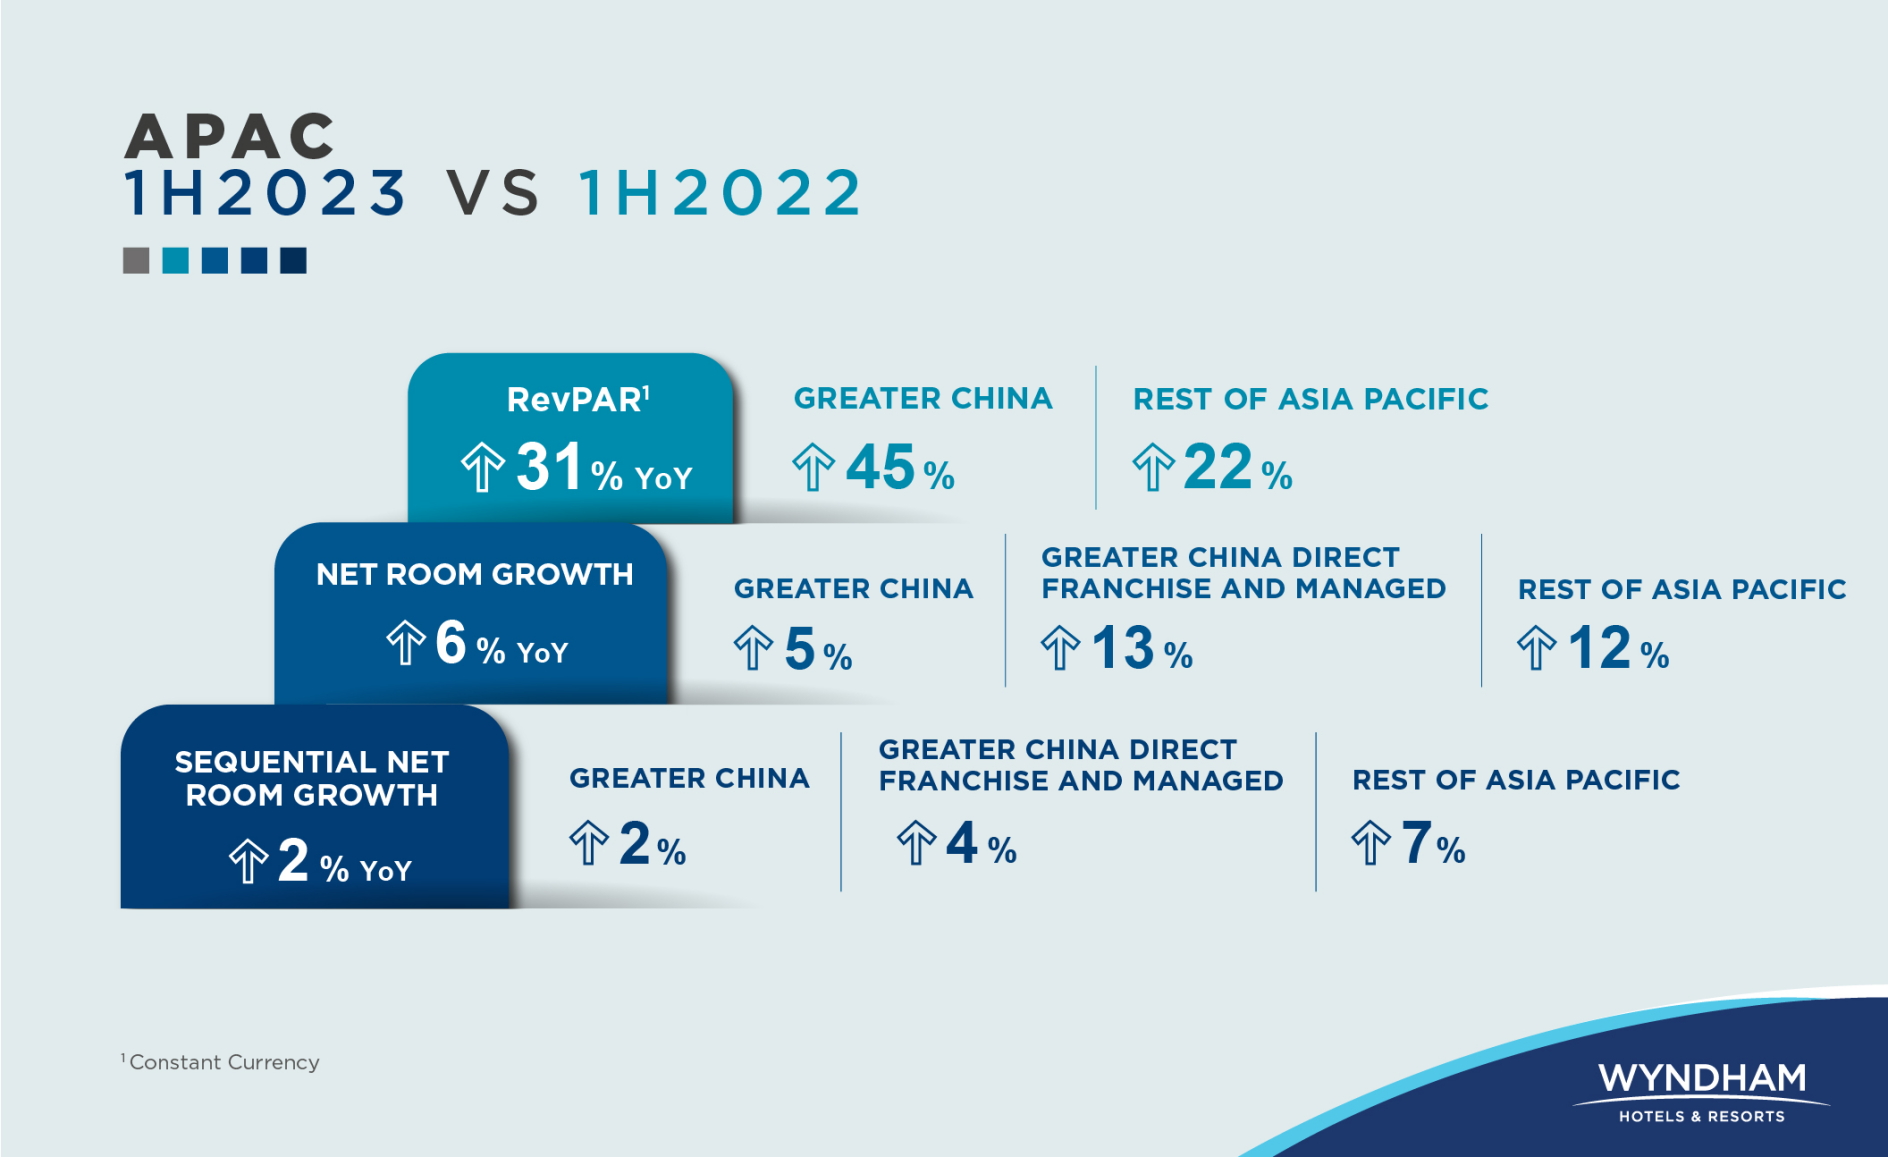 Wyndham reports strong H1 2023 RevPAR growth in Asia Pacific. Click to enlarge.